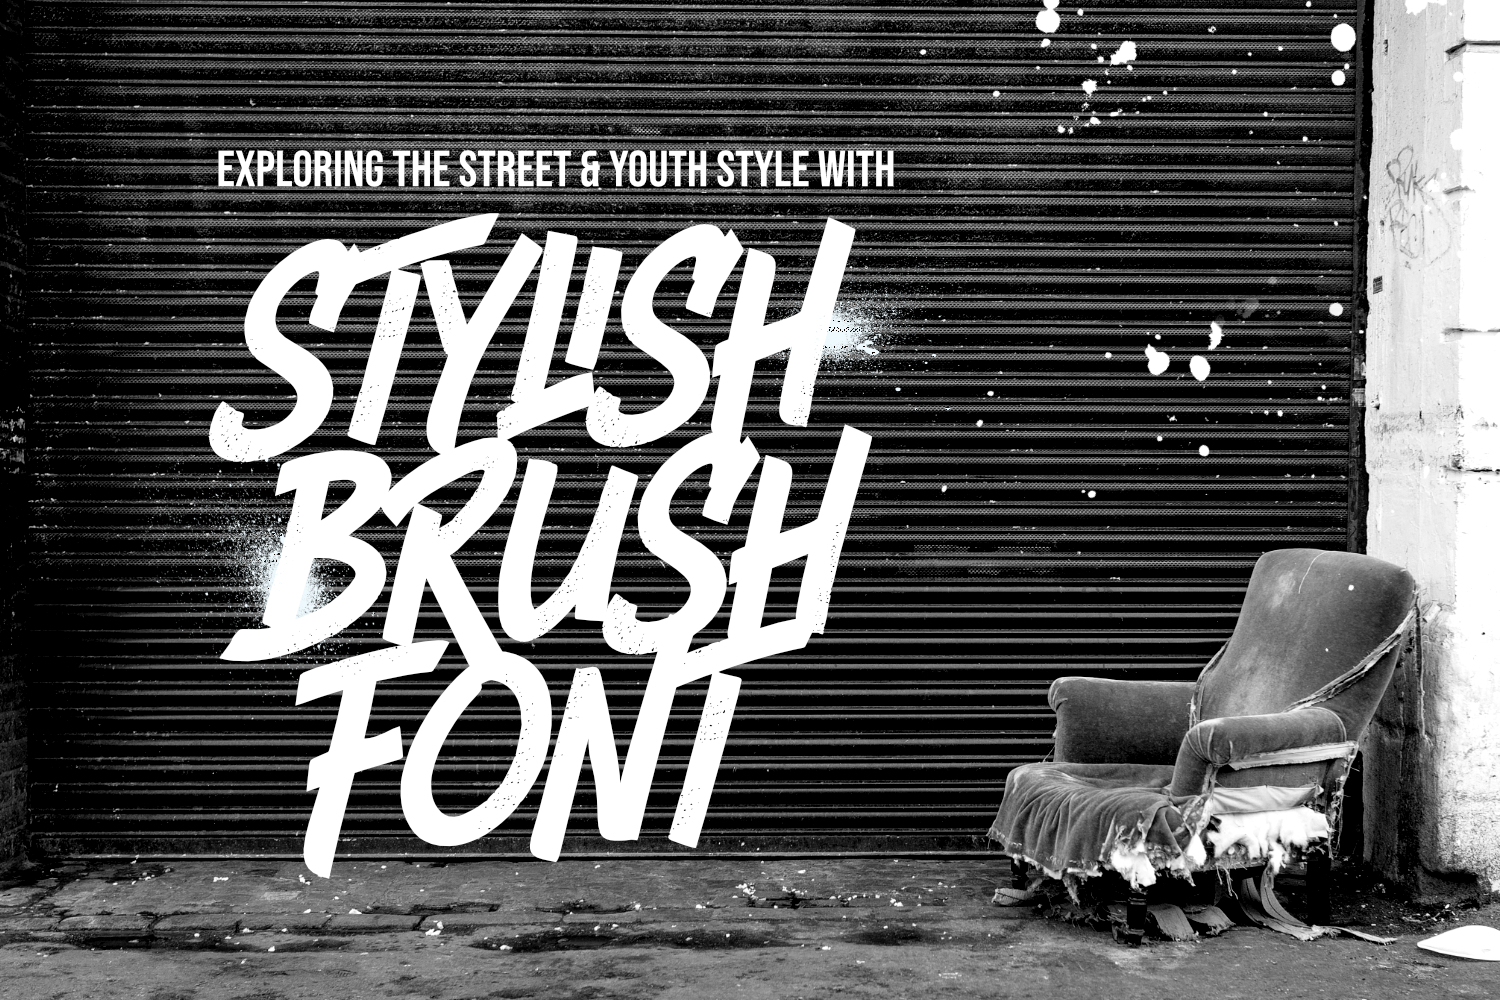 Exploring the Street & Youth Style with Stylish Brush Fonts